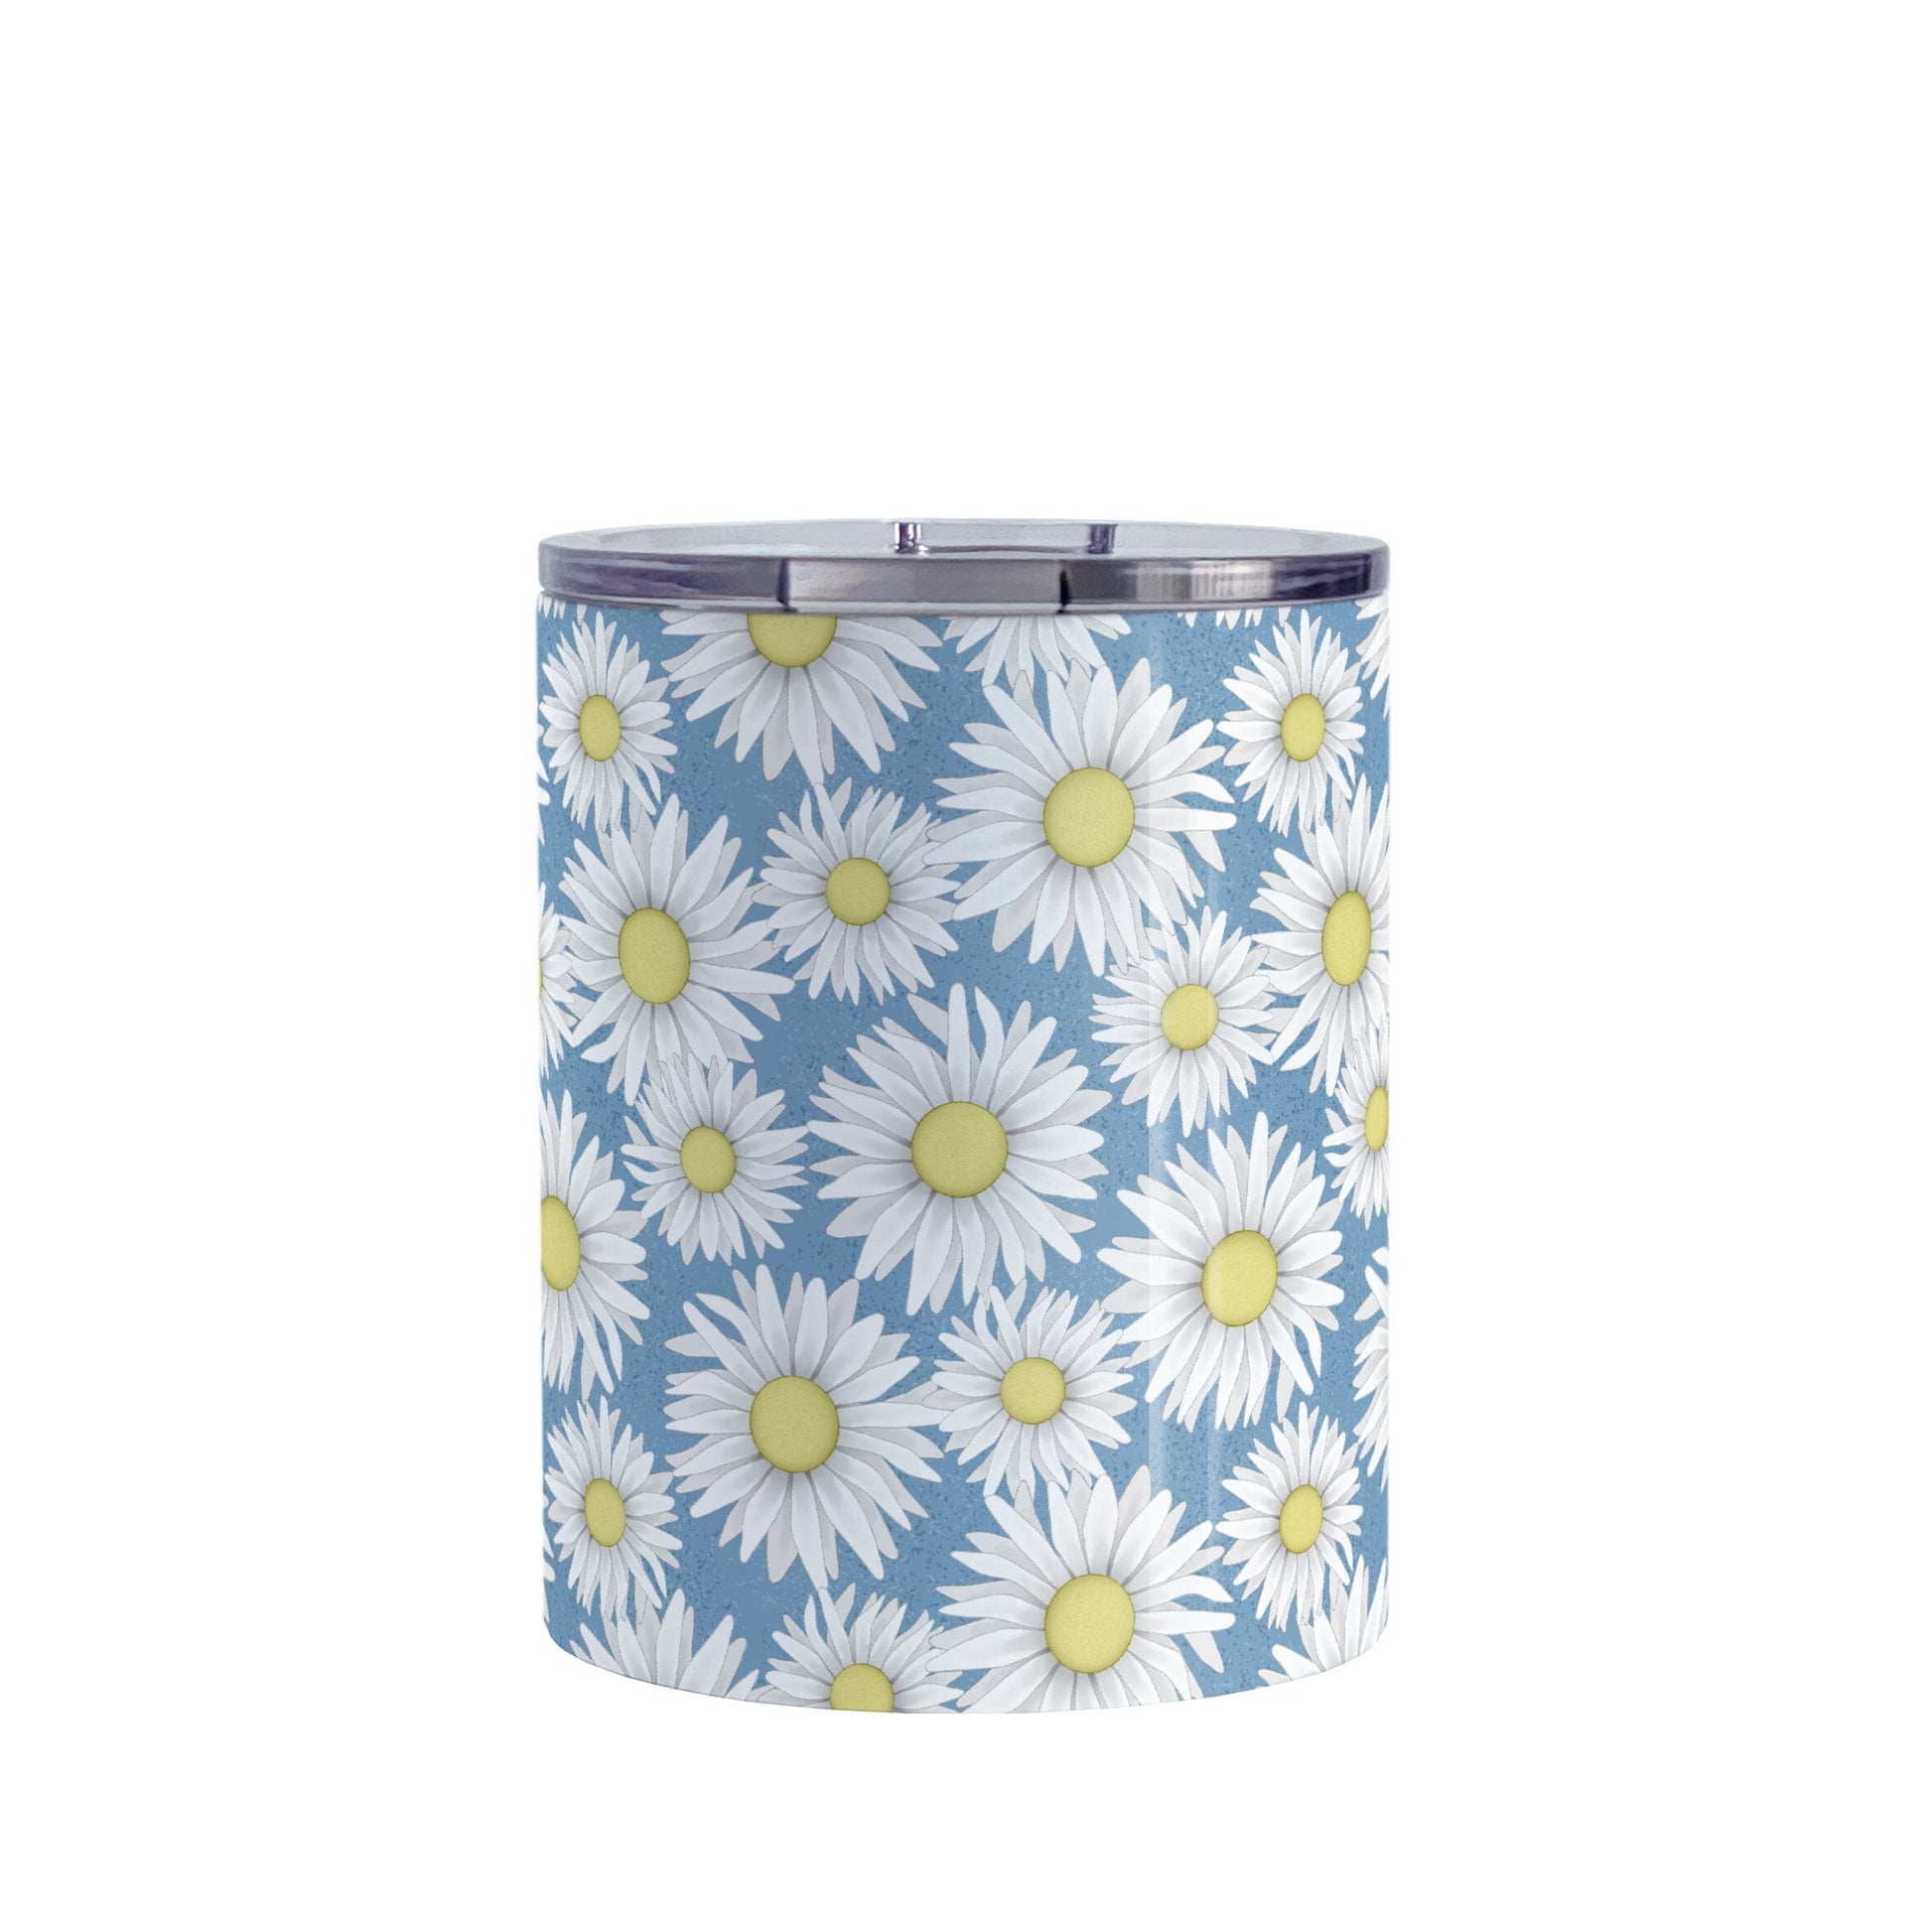 Blue Daisy Pattern Tumbler Cup (10oz) at Amy's Coffee Mugs. A stainless steel tumbler cup designed with a pretty pattern of white daisy flowers with yellow centers over a speckled blue background that wraps around the cup.